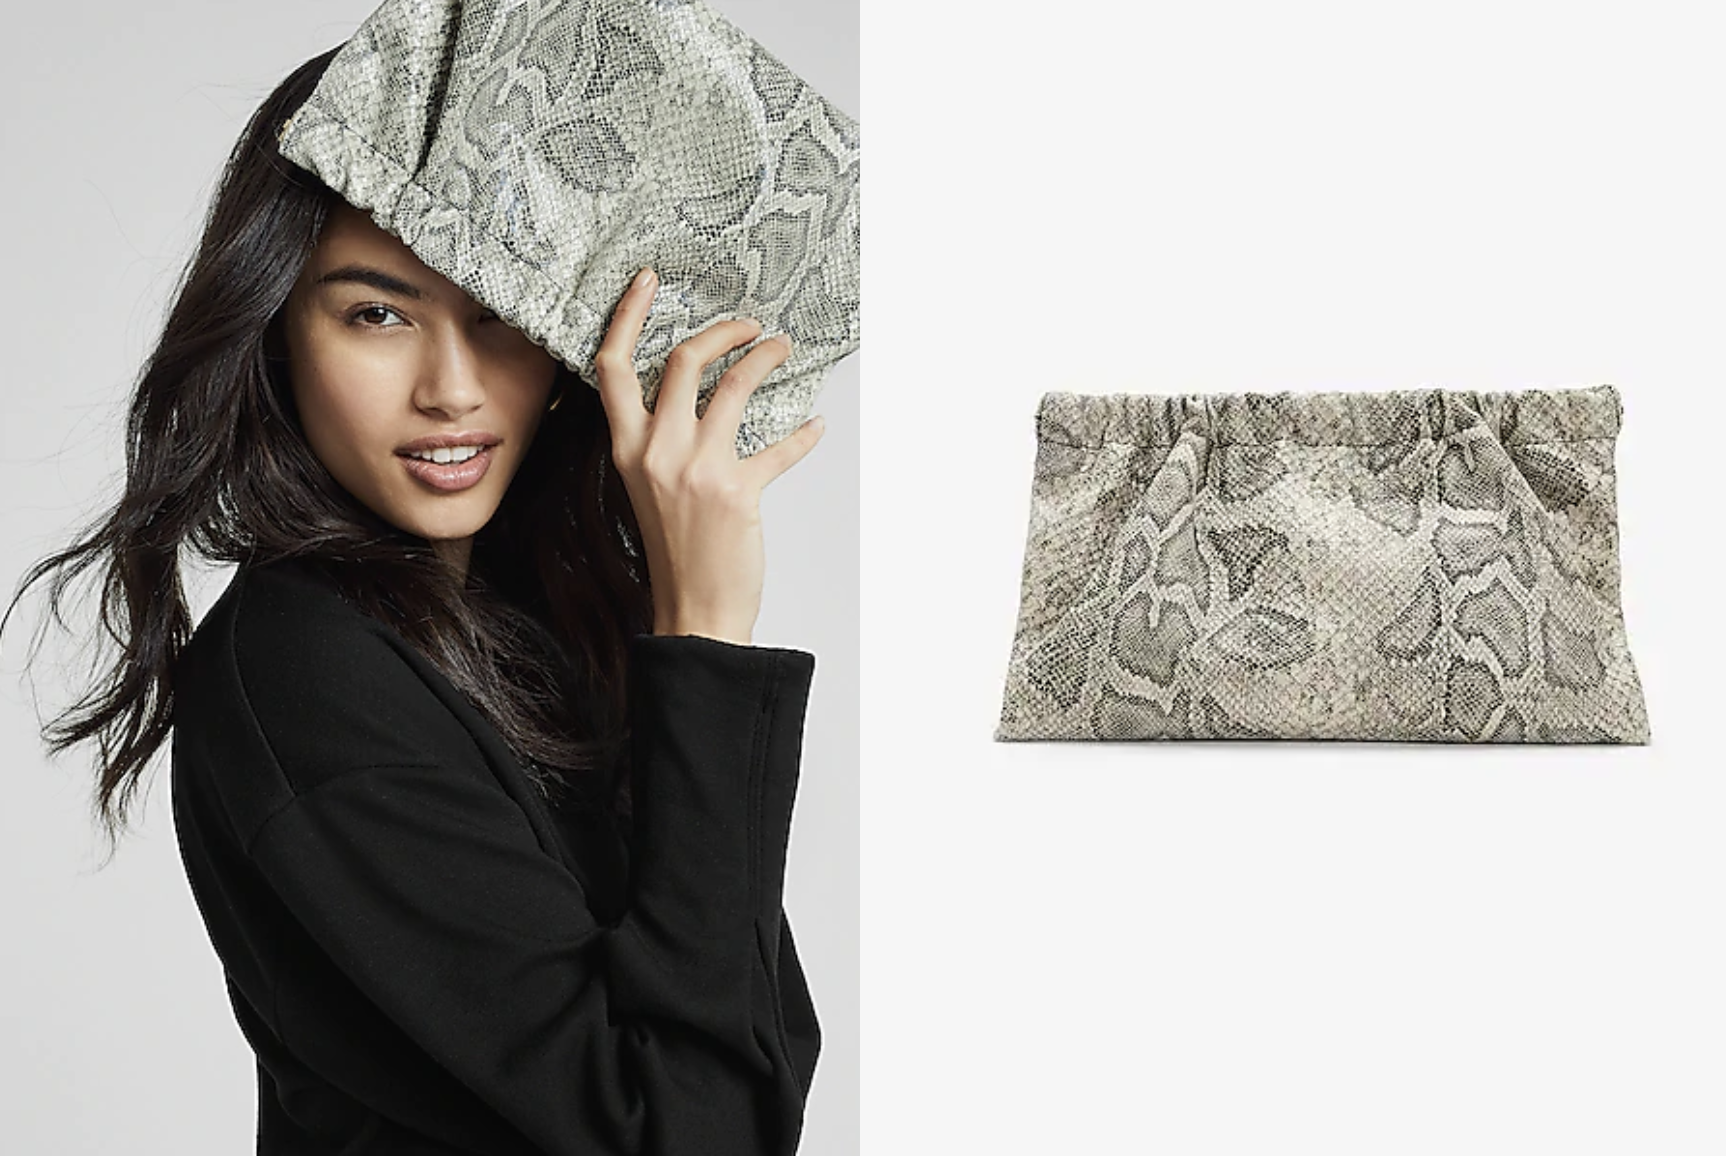 model holds clutch in snake print, next to image of snake print clutch